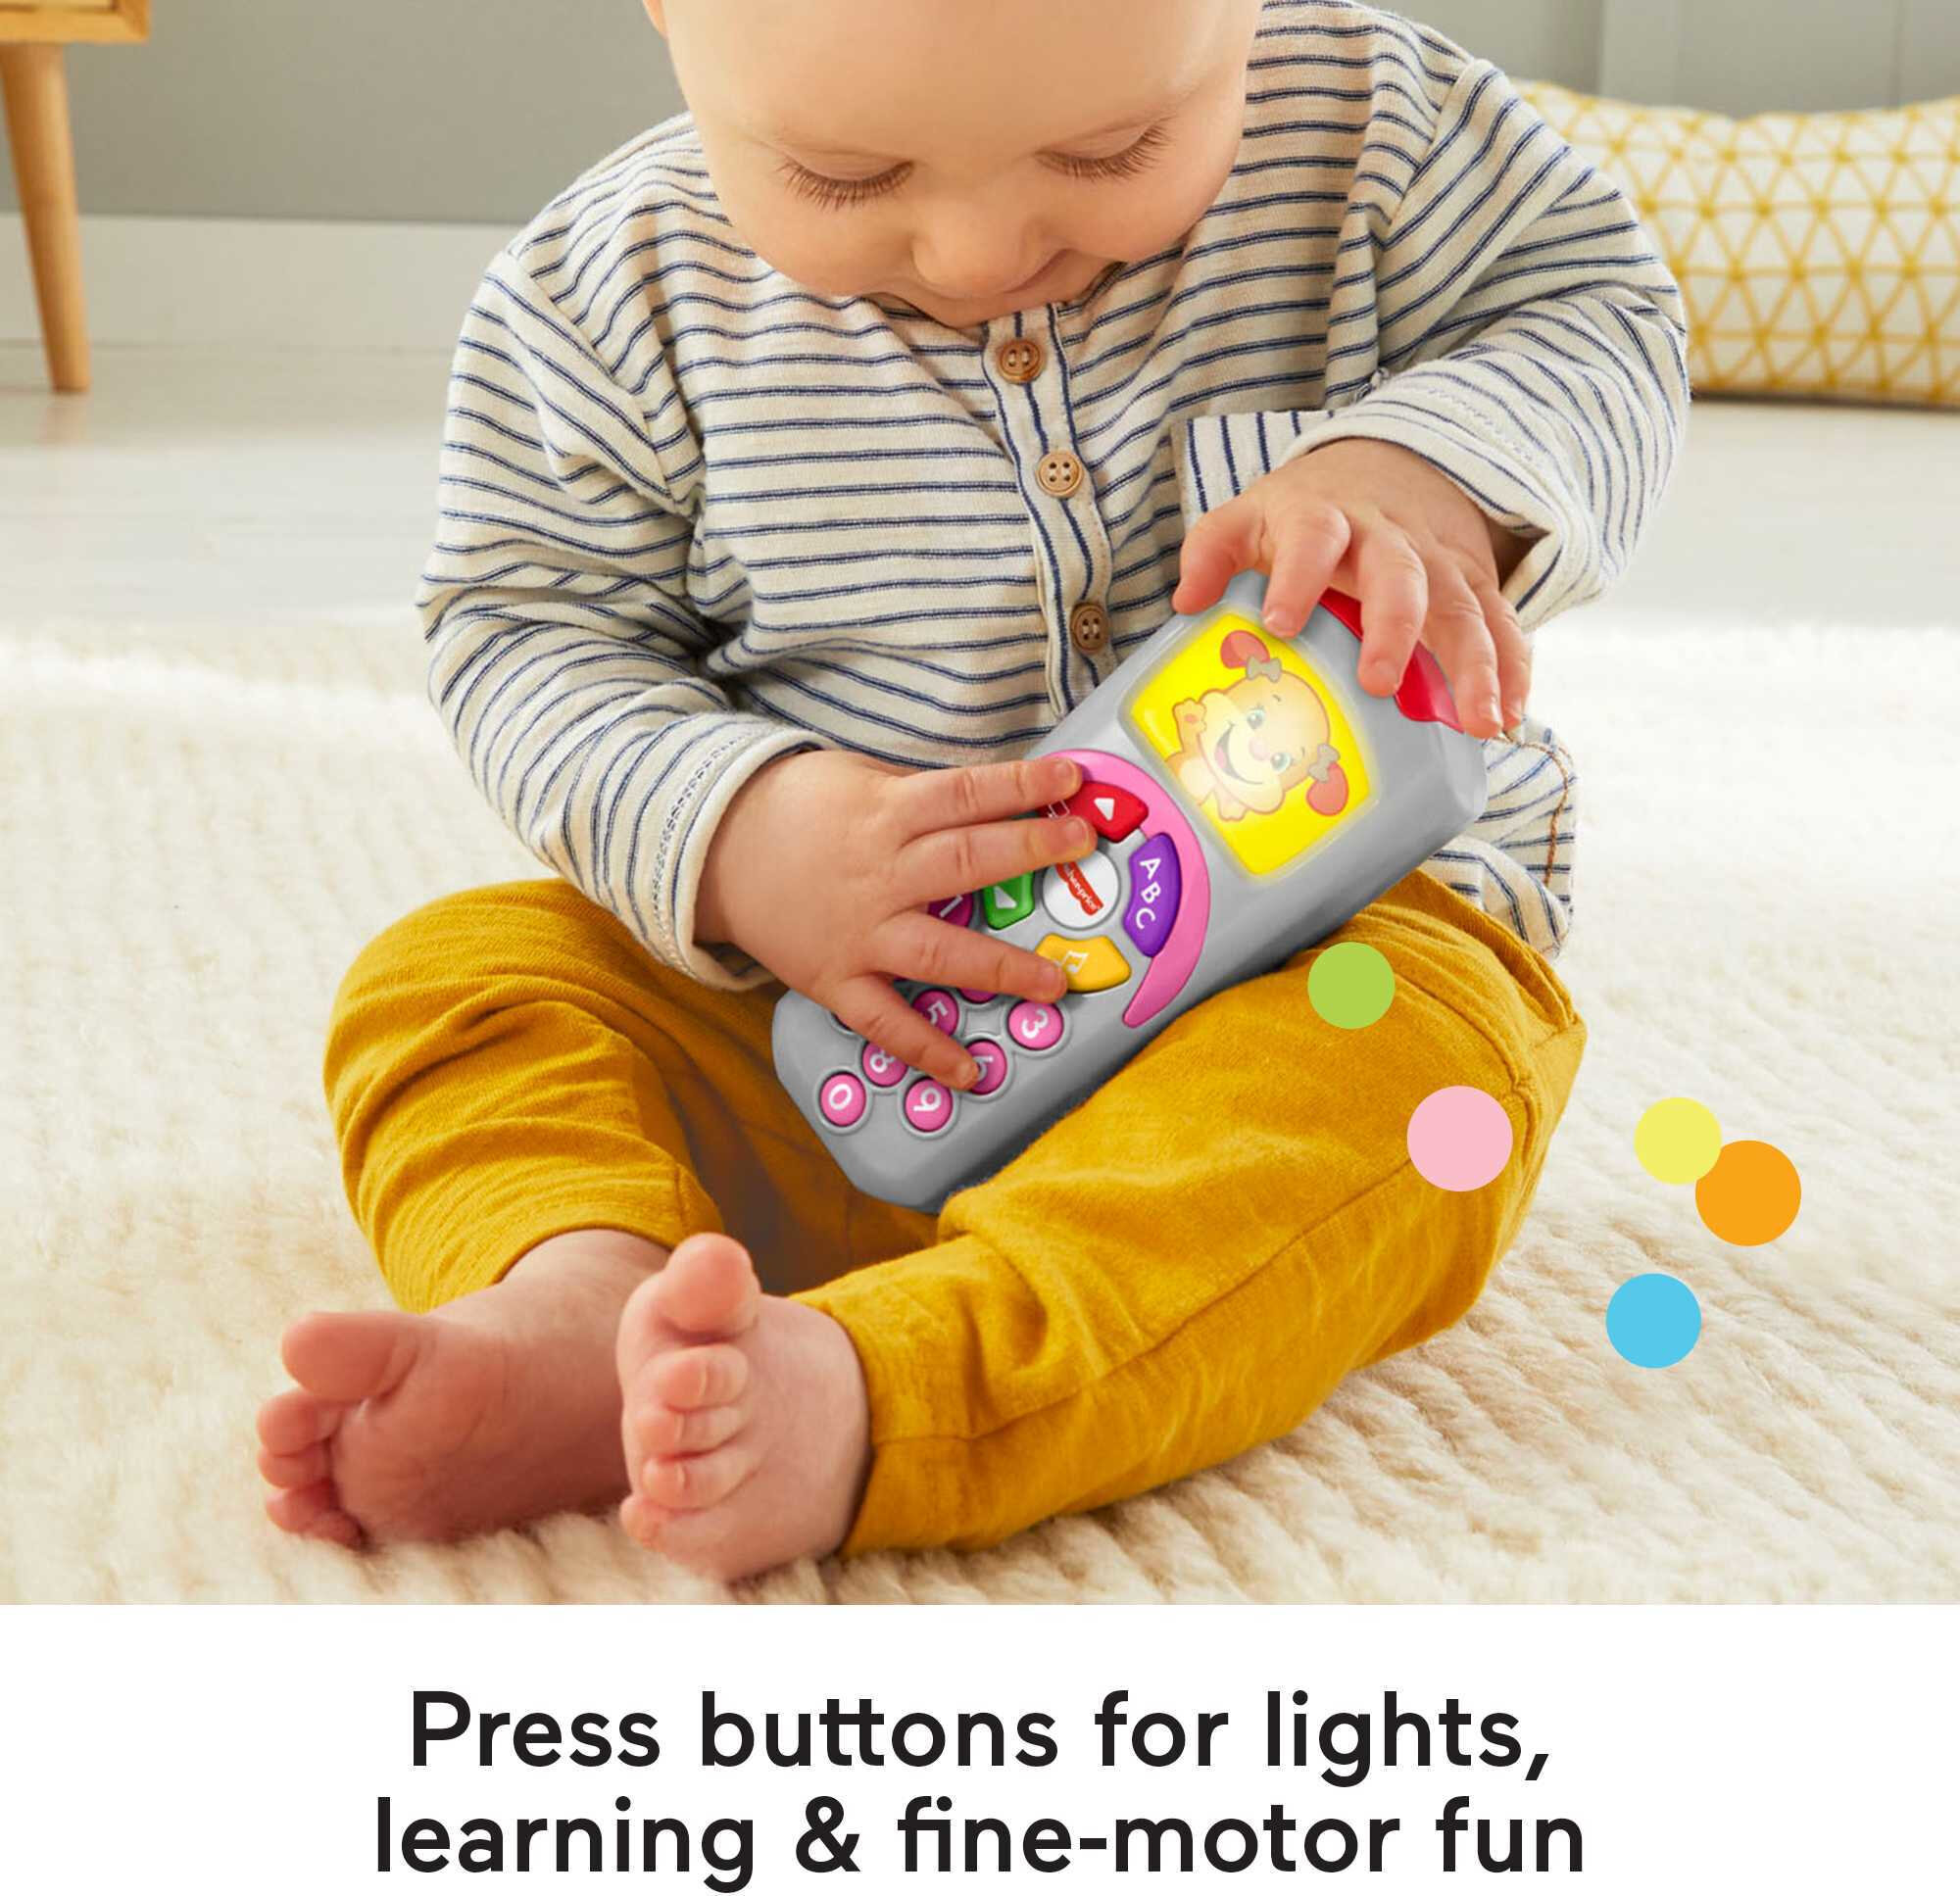 Fisher-Price Laugh & Learn Sis’s Remote Baby & Toddler Learning Toy with Music & Lights - image 4 of 7